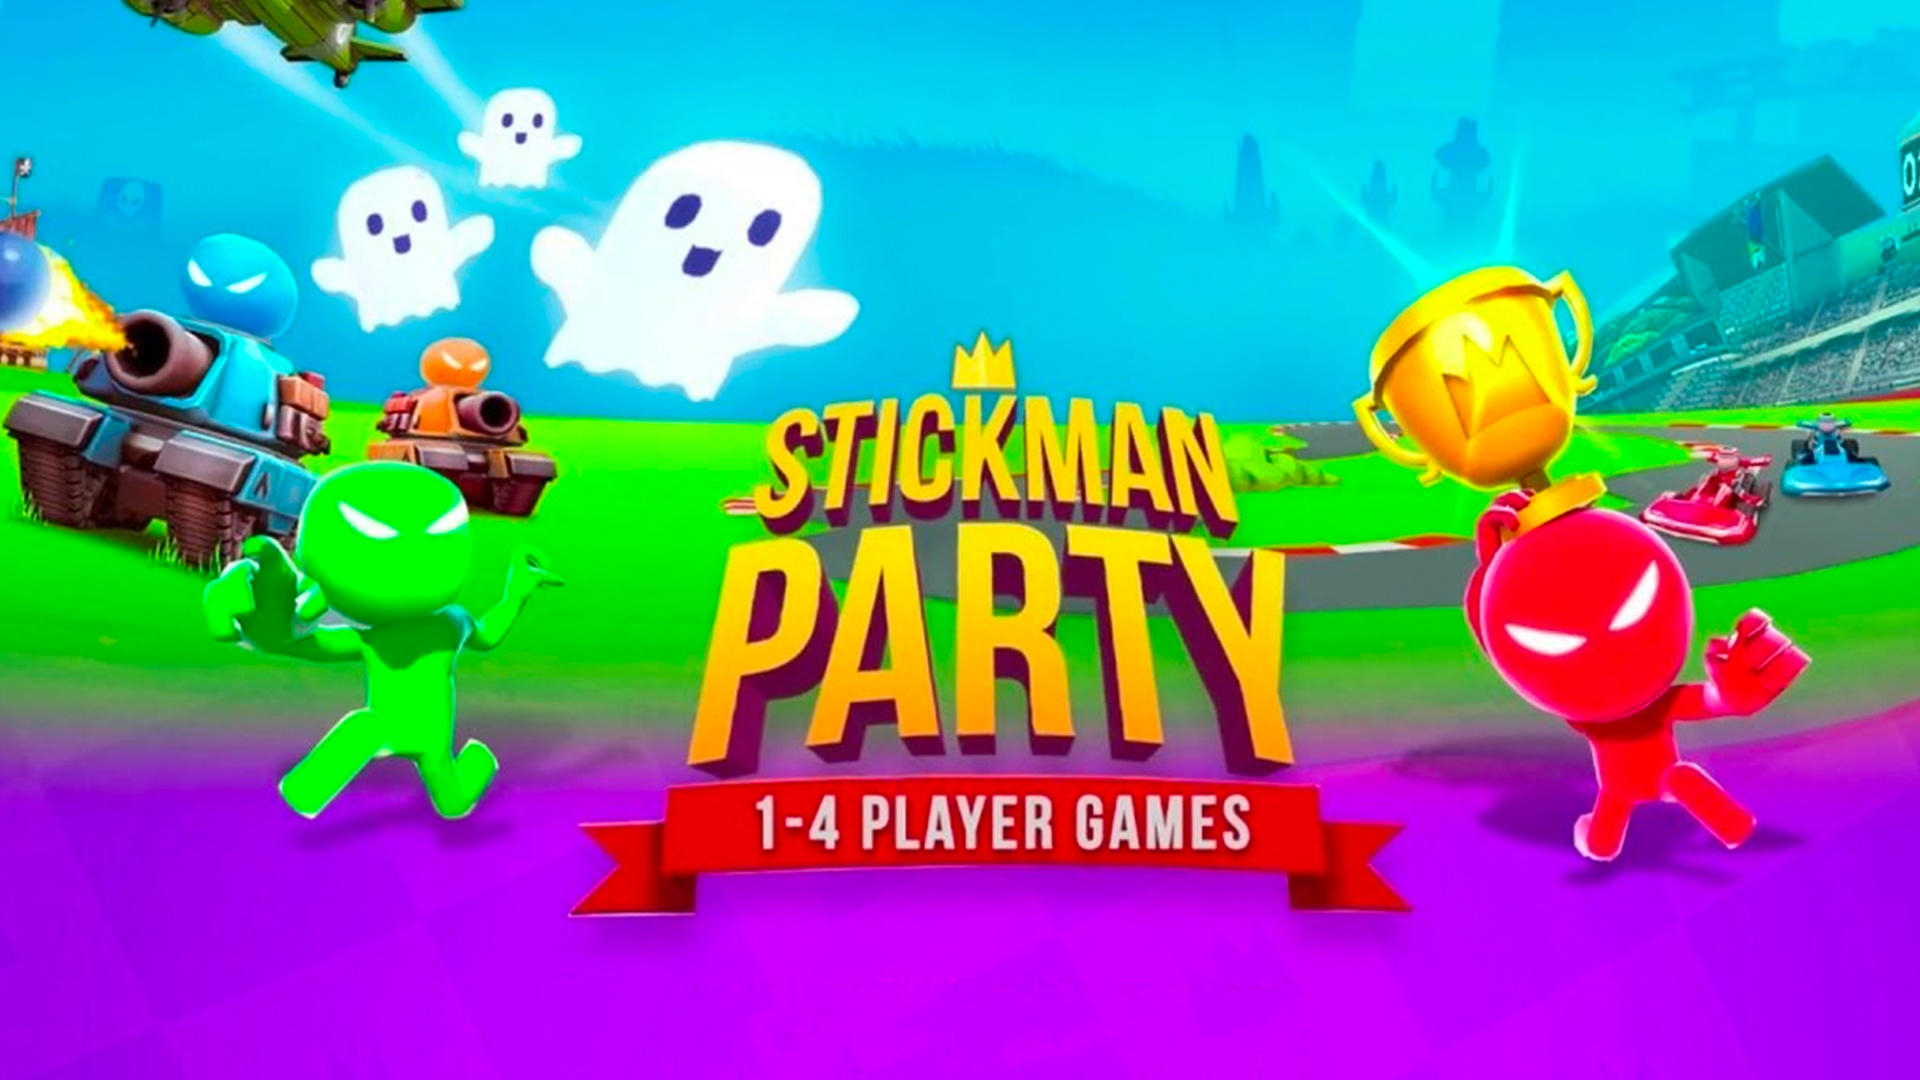 Stickman Party: 4 Player Games on the App Store